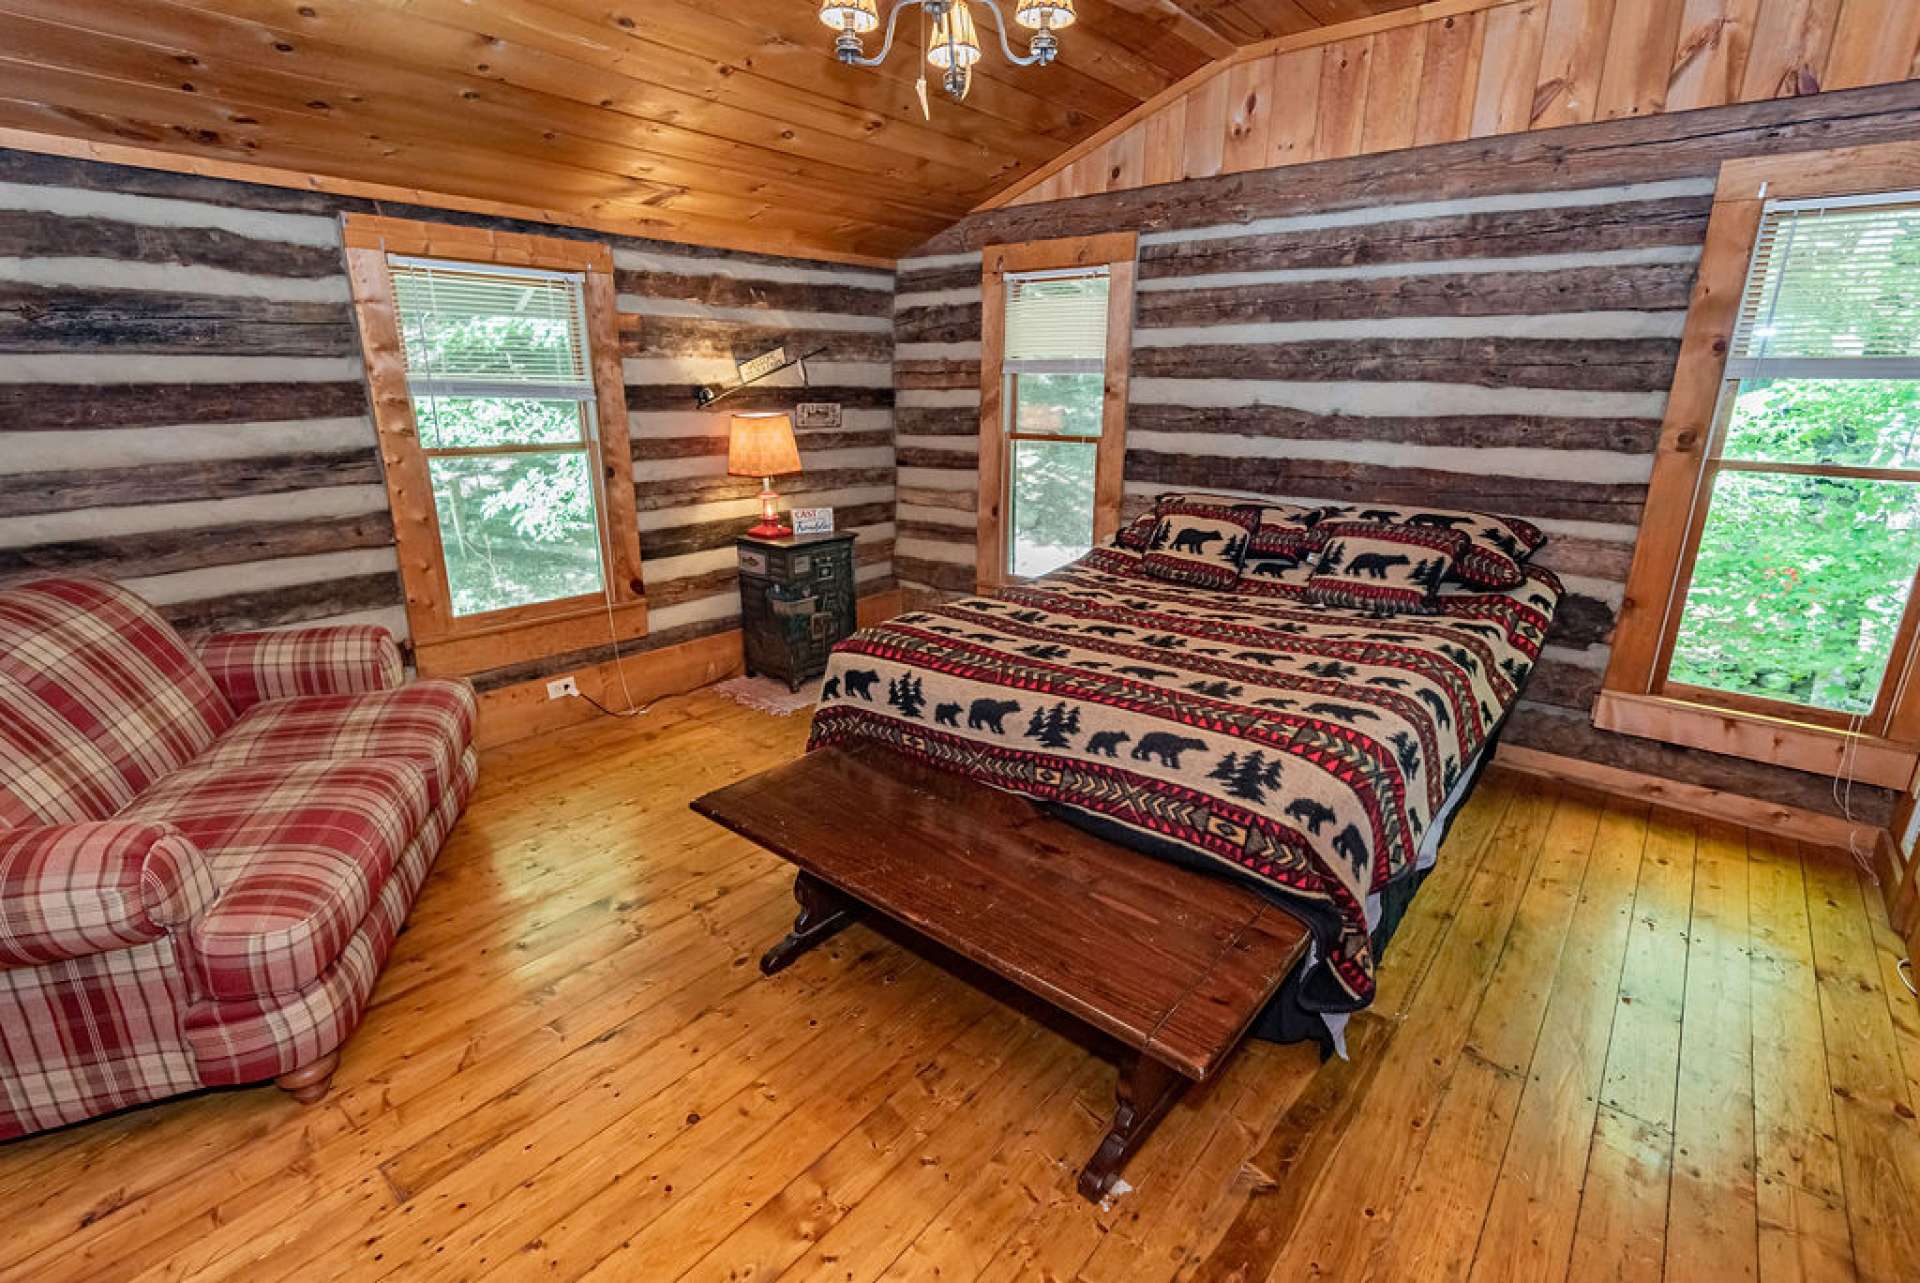 Windows all around in this spacious second guest bedroom on upper level.